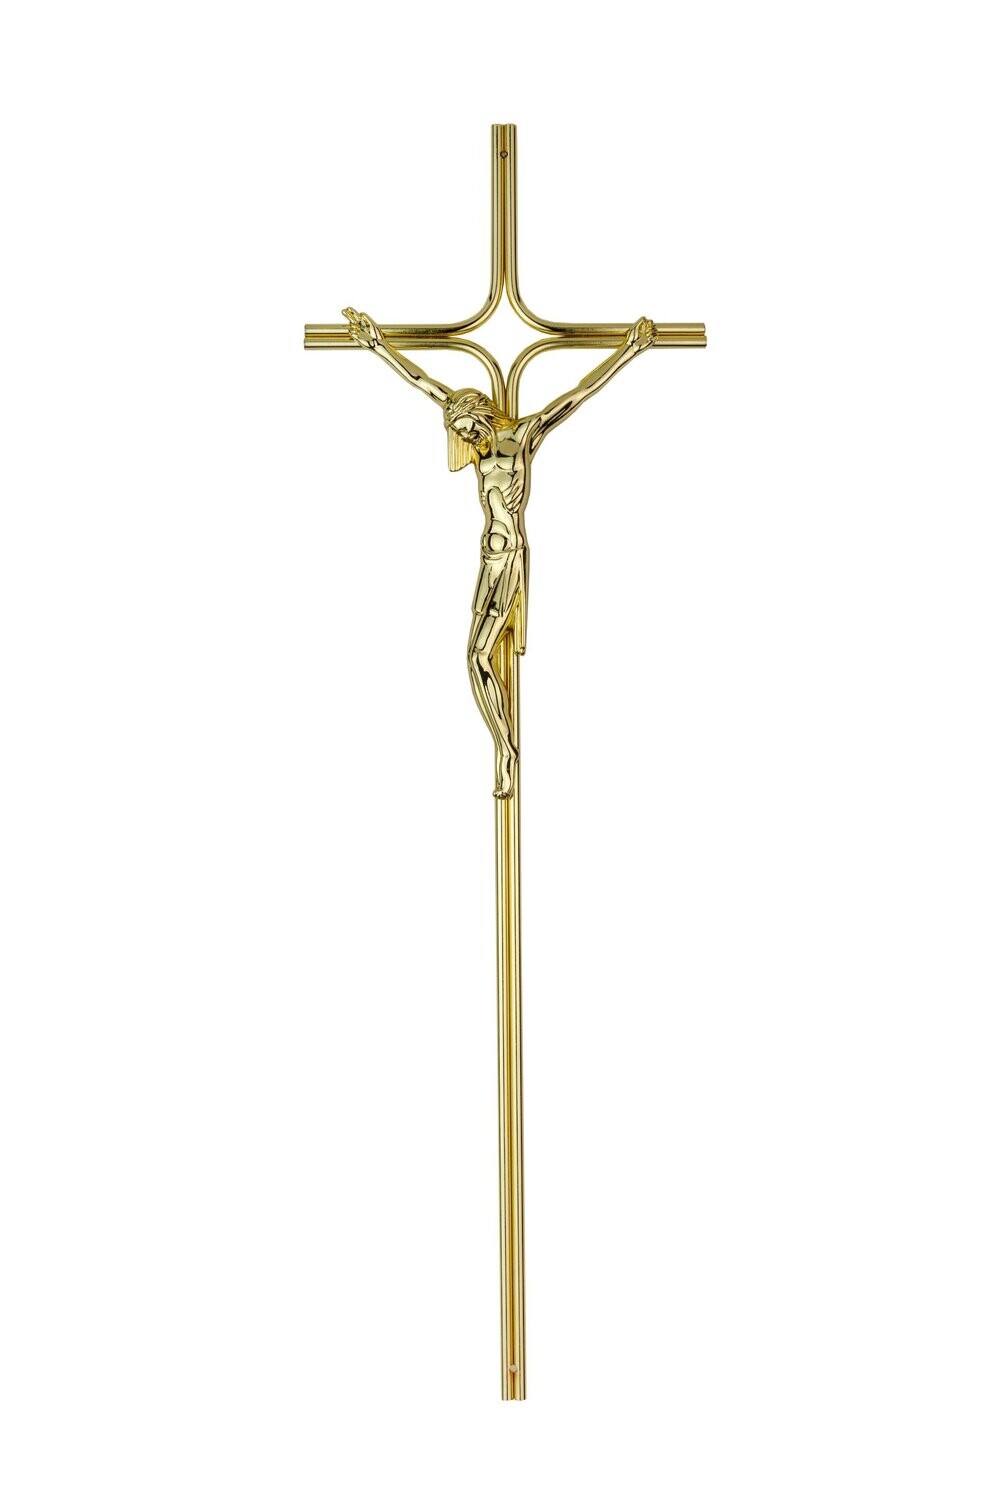 Cross for coffin with Christ in zamak alloy series 561 polish brass finishing